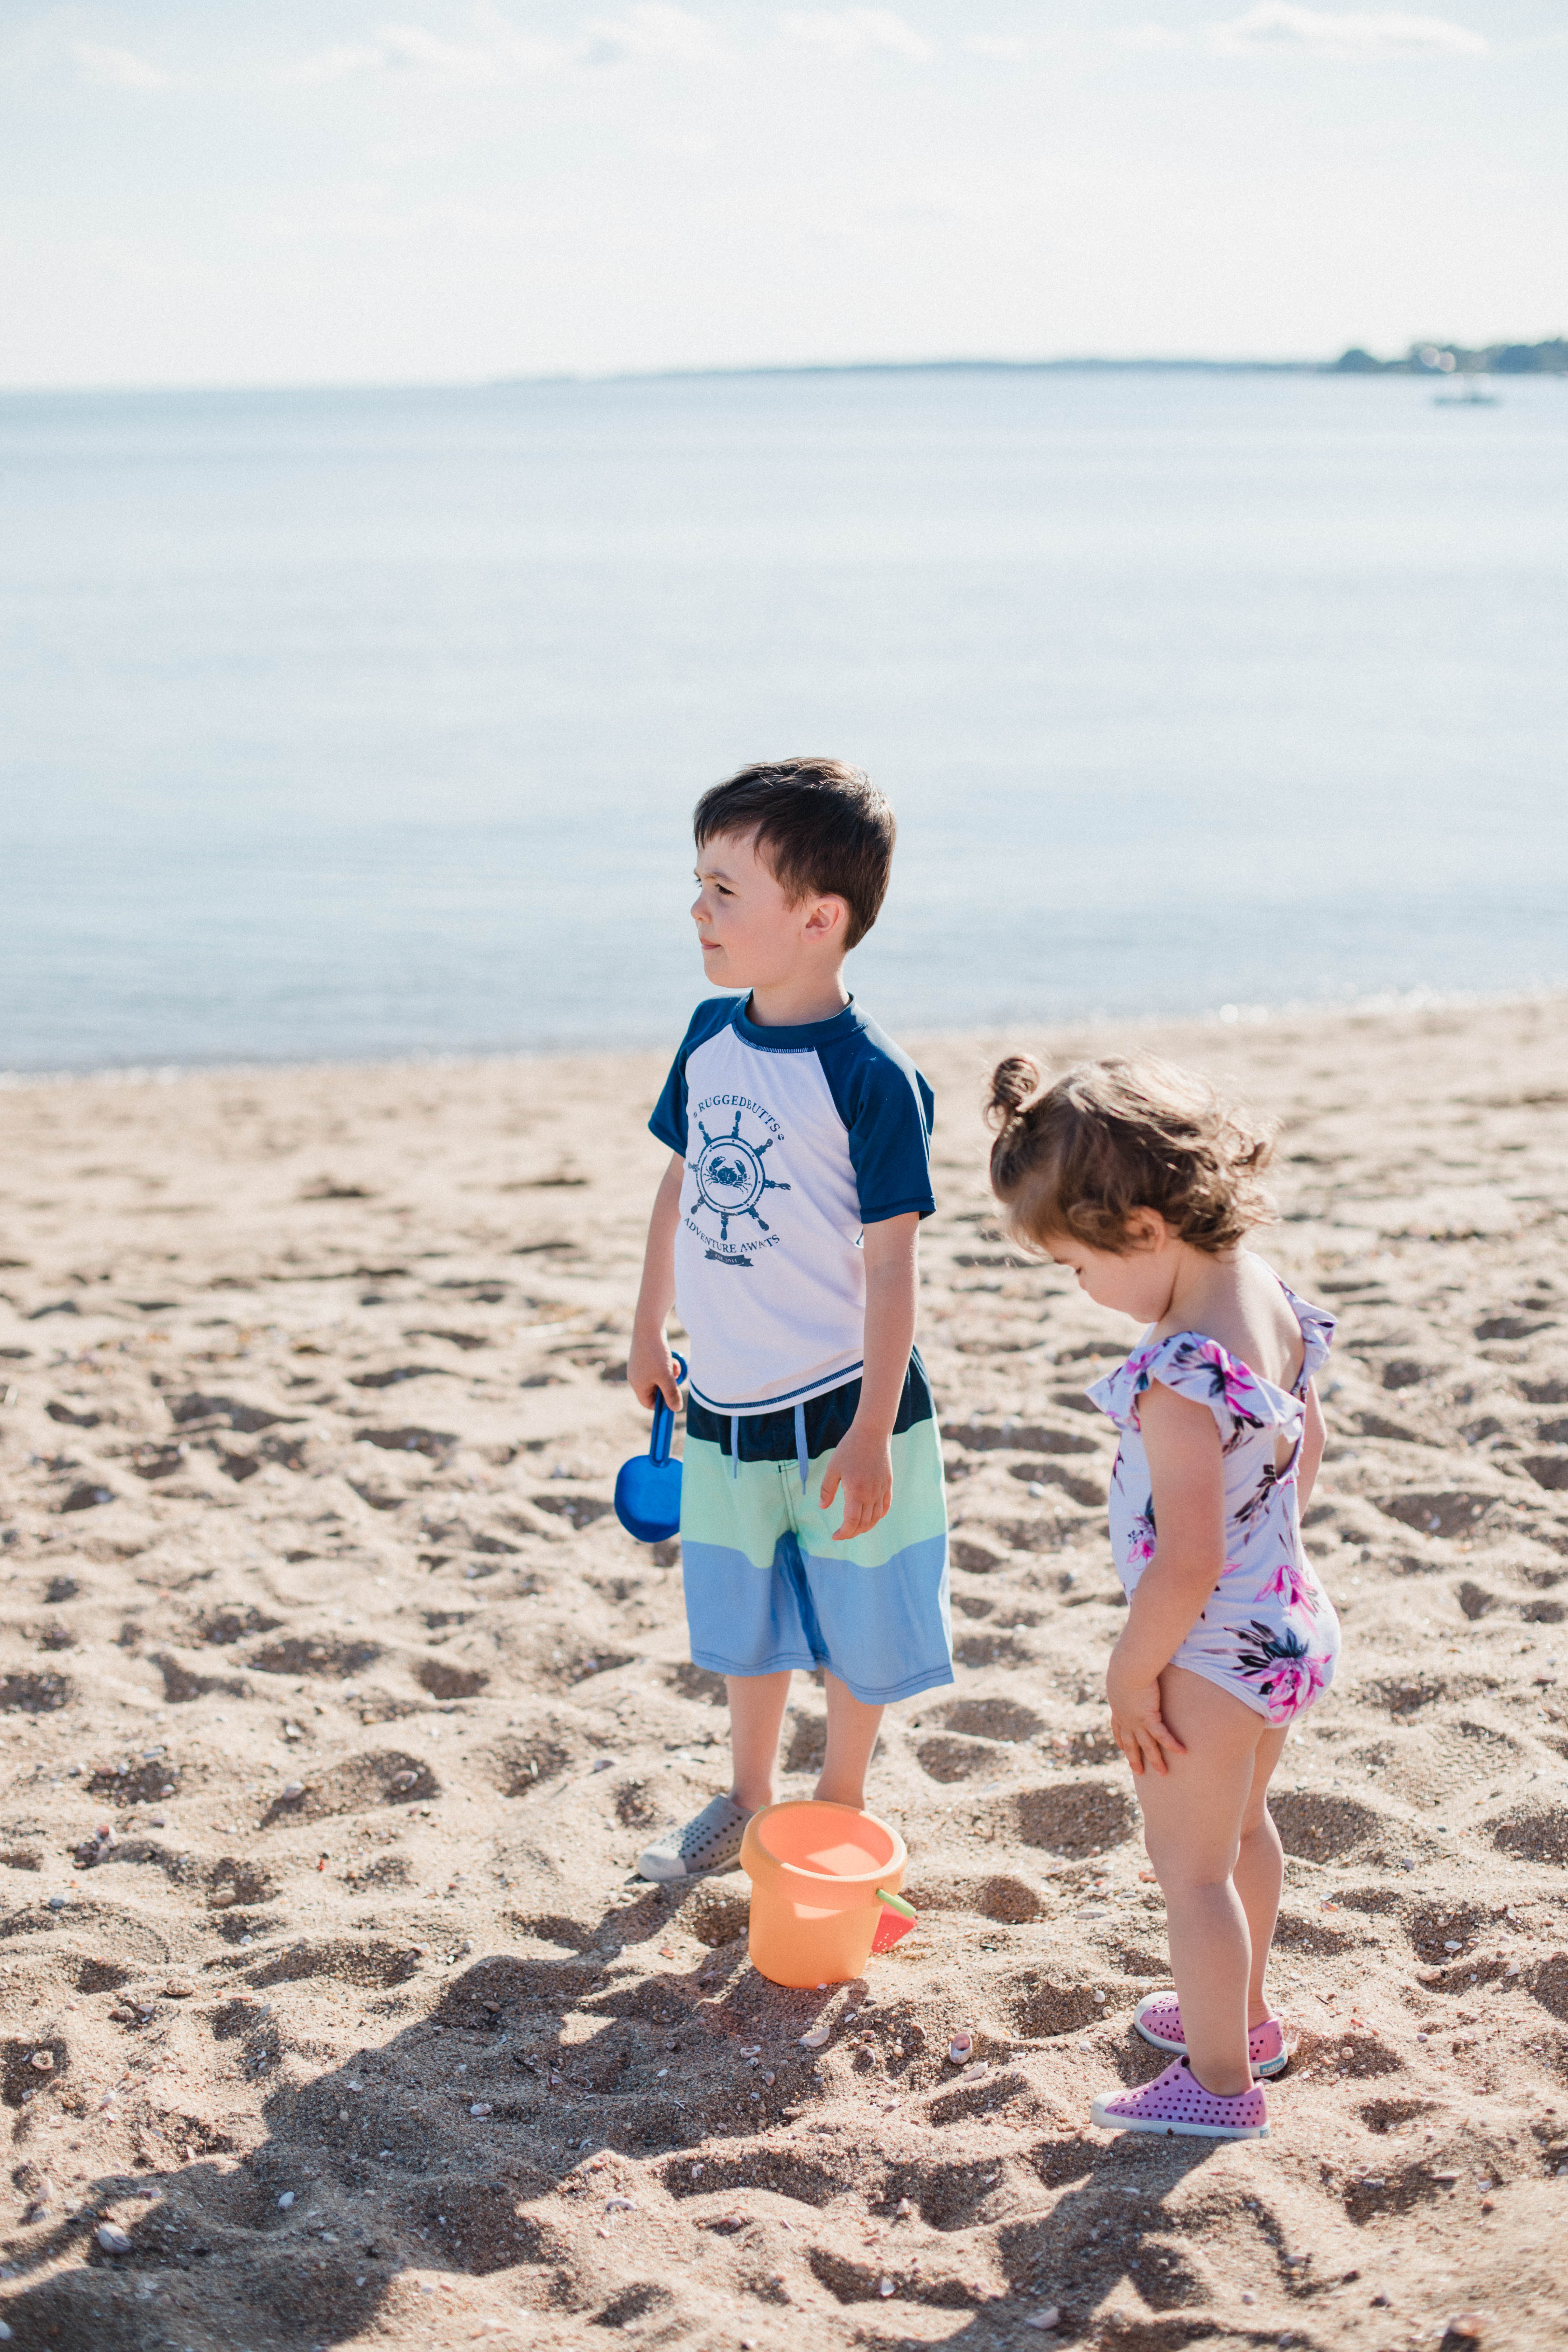 Life and style blogger Lauren McBride shares her Beach Essentials for Kids that will get your family through beach season this summer, featuring swimwear, toys, and more.